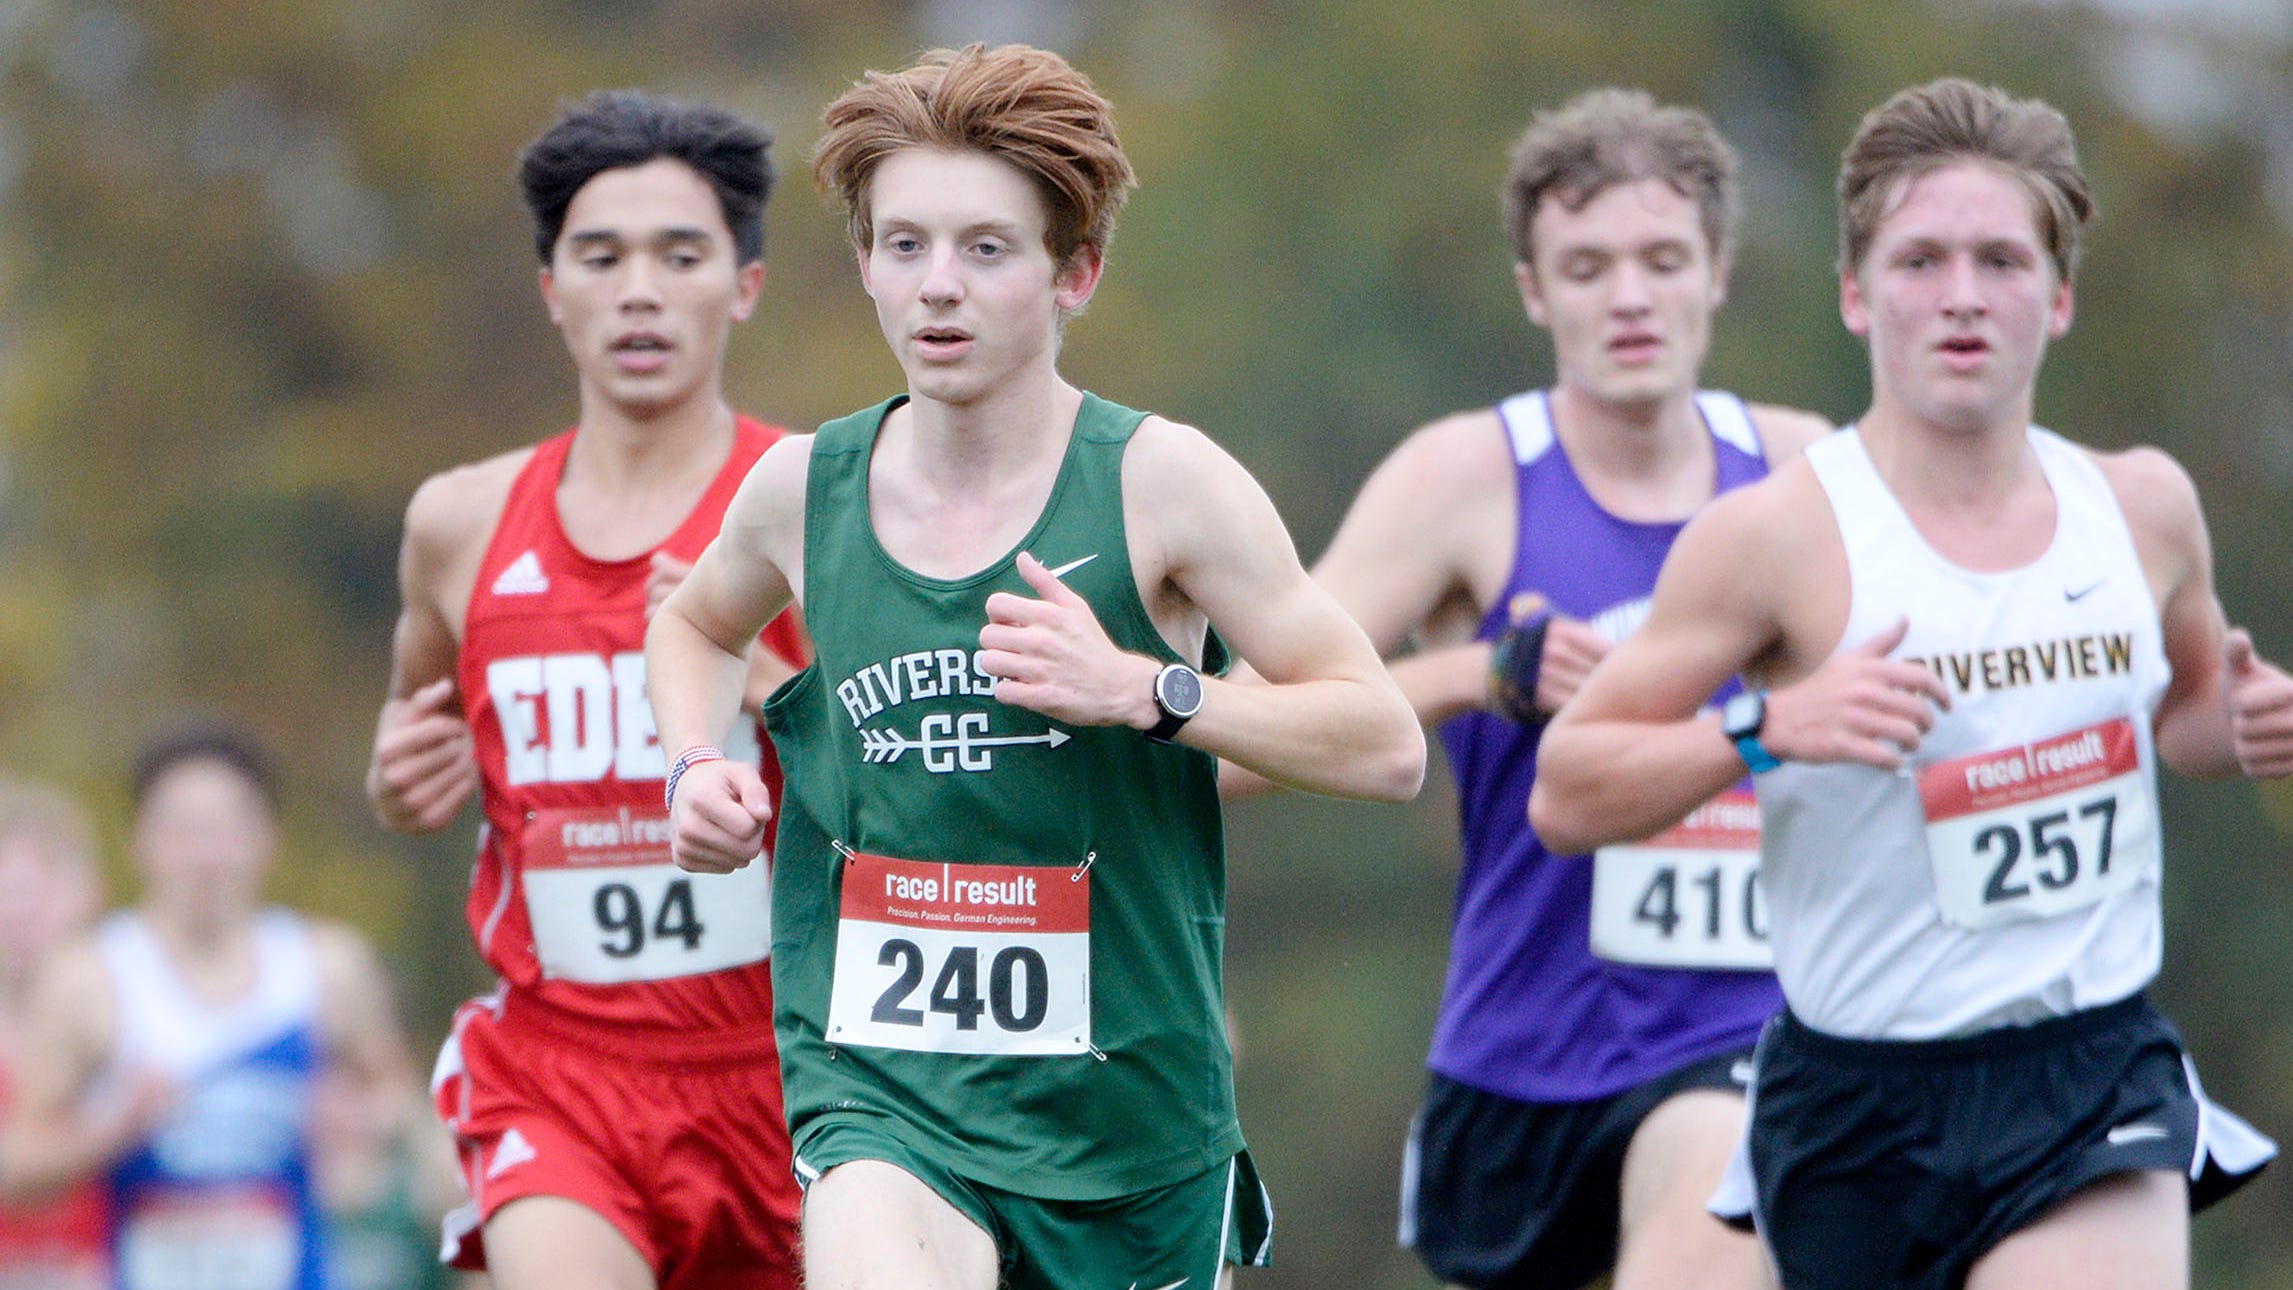 Colby Belczyk places fifth at WPIAL 1A cross country championships